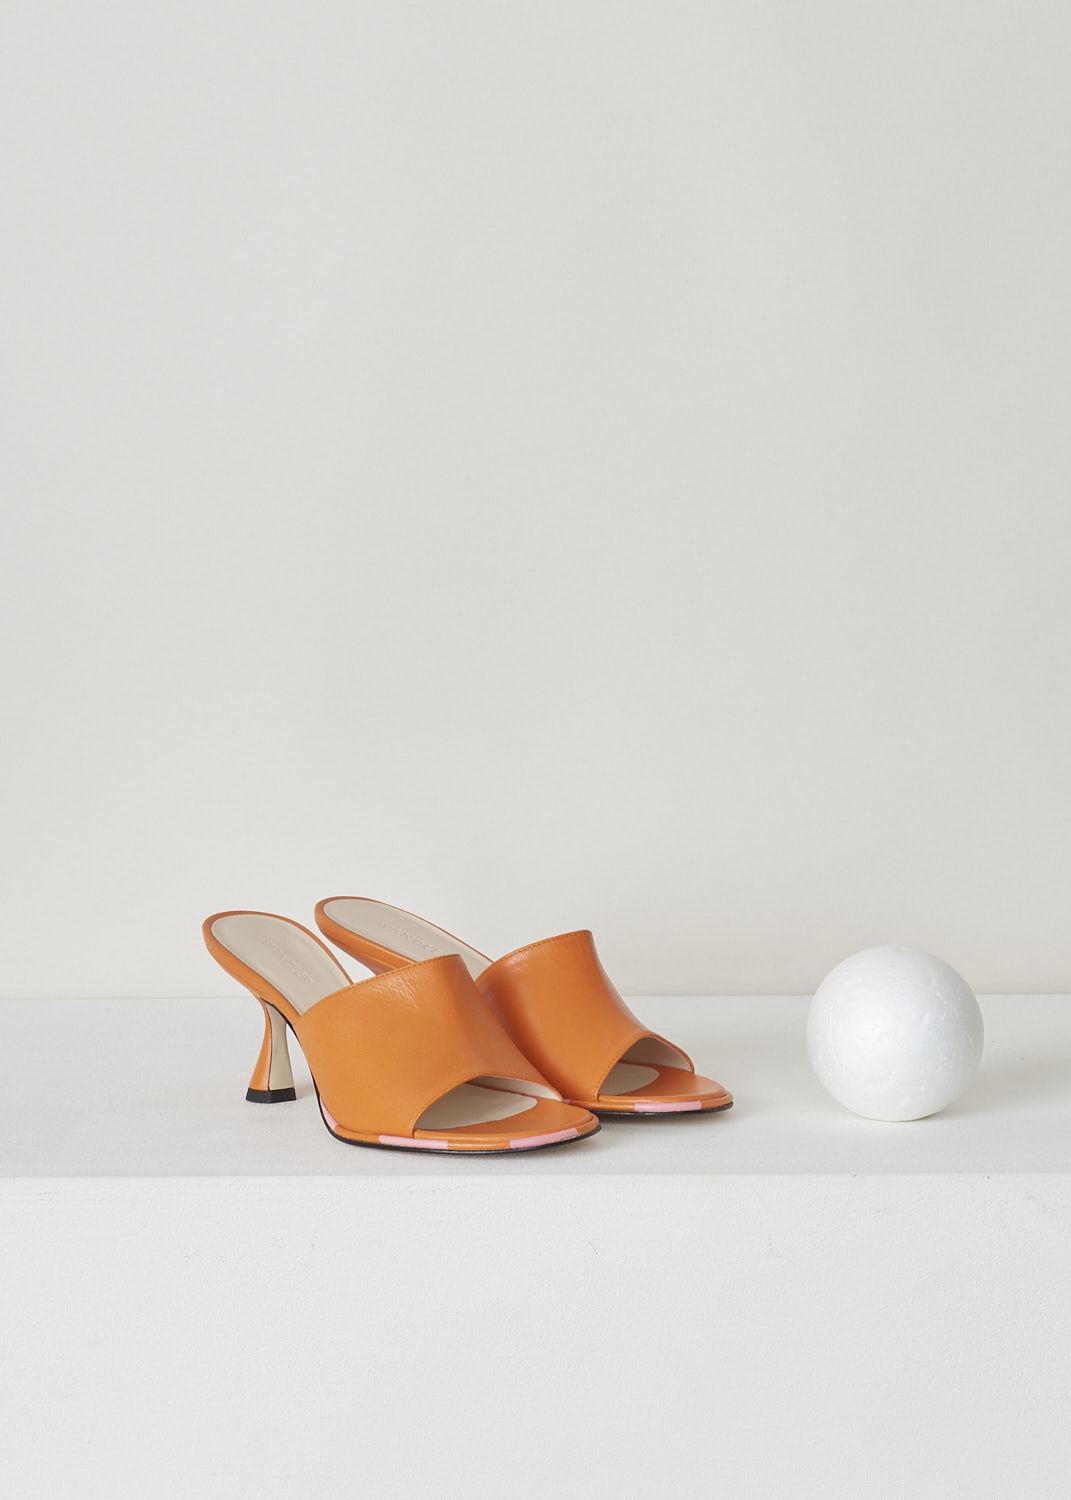 WANDLER, ORANGE HEELED MULES, 22202_701204_2209_AGNES_MULE_PUNCH_MIX, Orange, Pink, Front, These orange heeled mules have a rounded open-toe with contrasting pink stripes decorating the trim. The slip-on mules have a mid-height trapezoid shaped heel.
